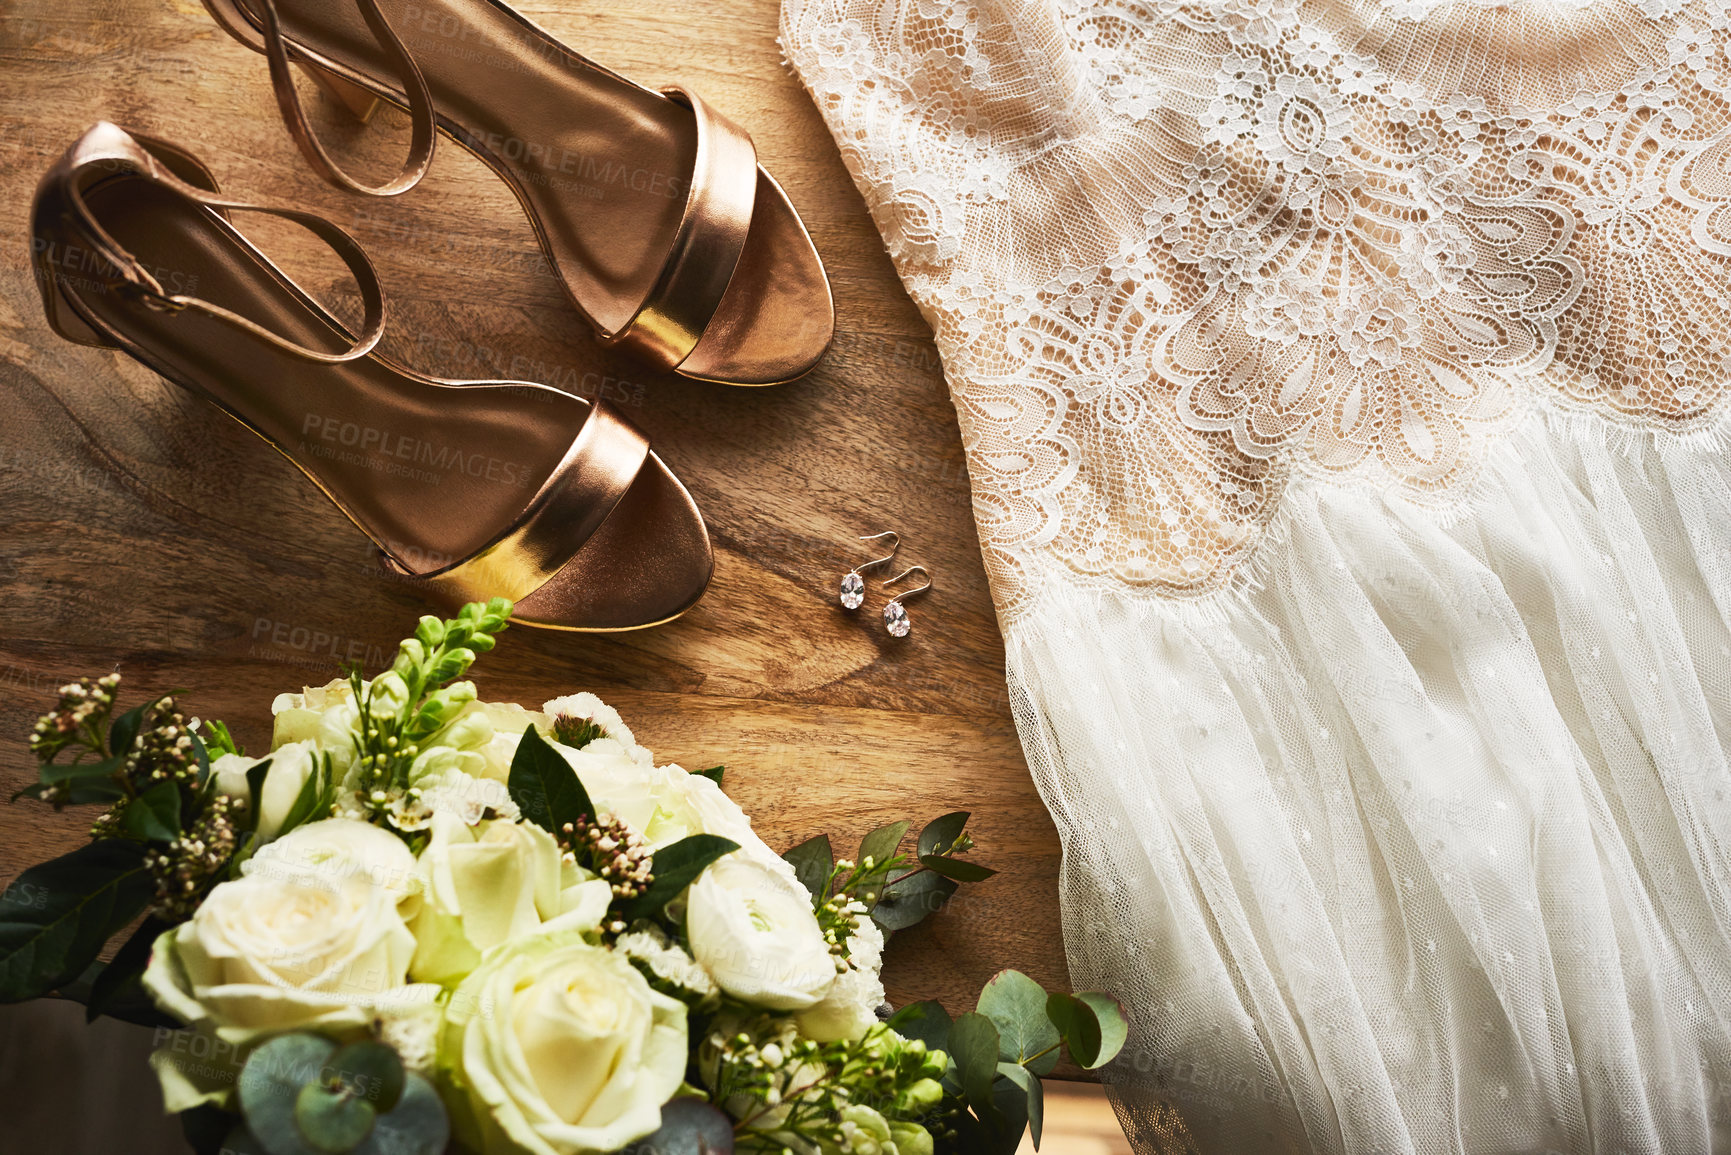 Buy stock photo Still life shot of a bride's shoes, wedding dress and bouquet on a wooden floor